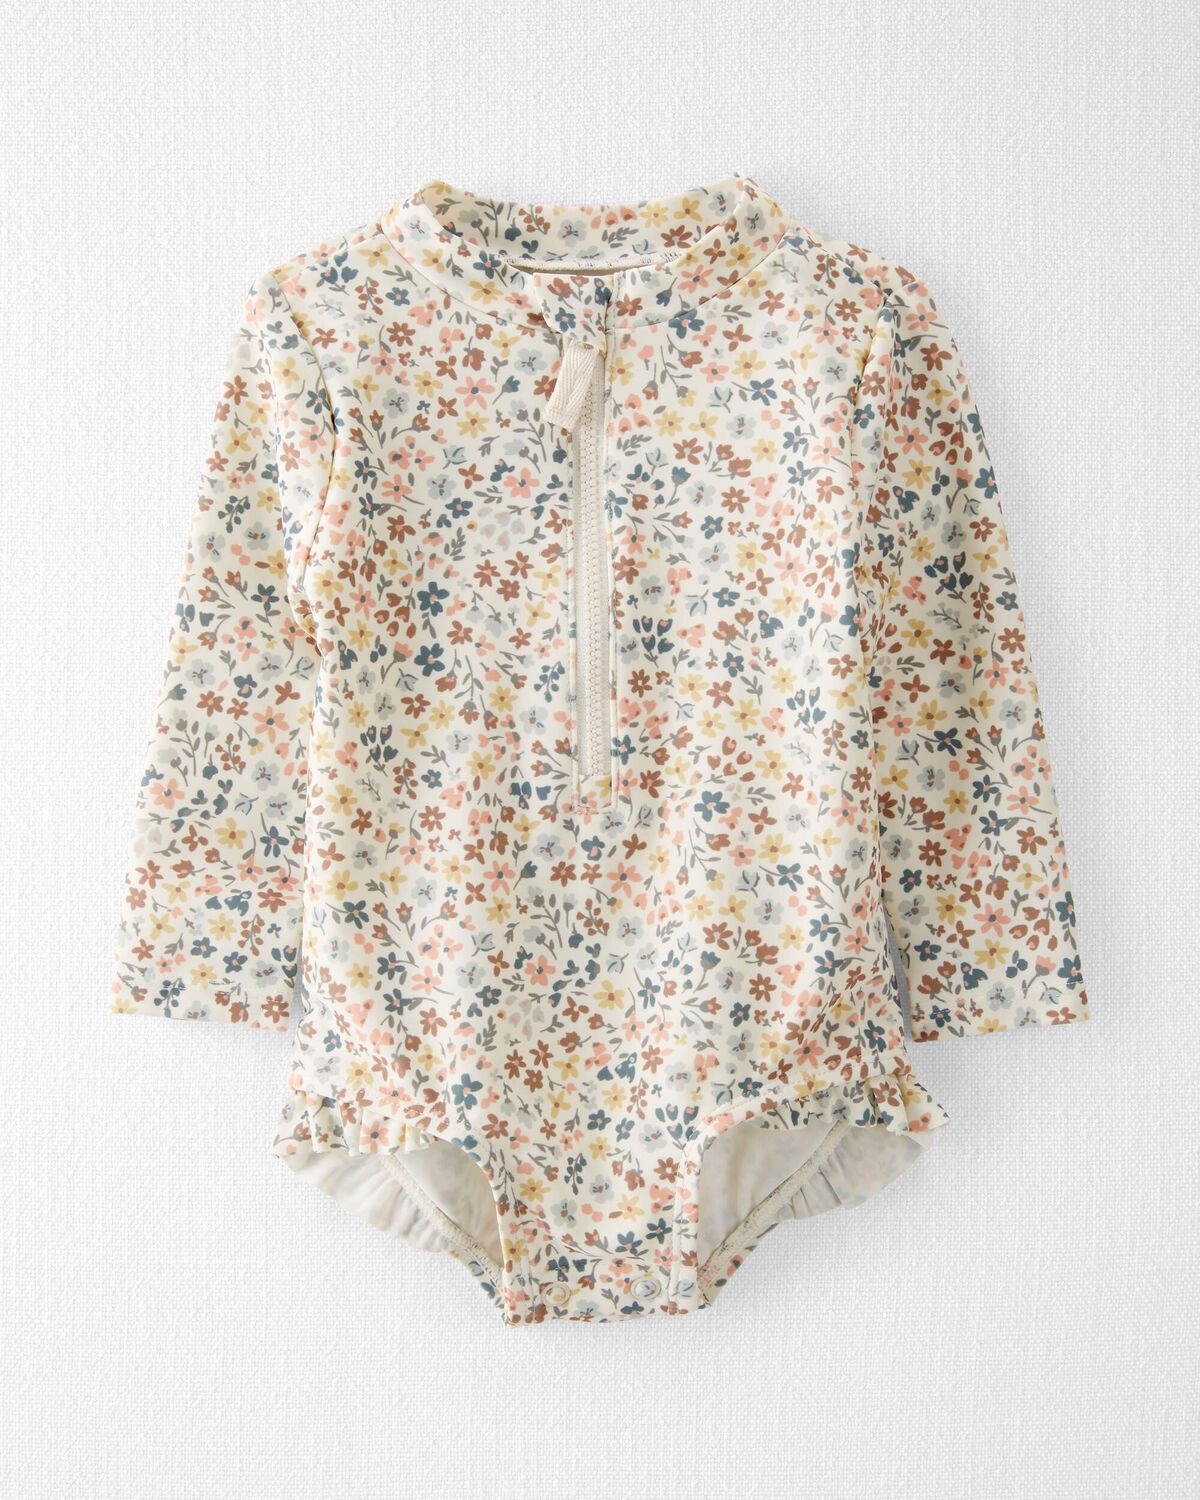 Floral Print Baby Recycled 1-Piece Rashguard Swimsuit | carters.com | Carter's